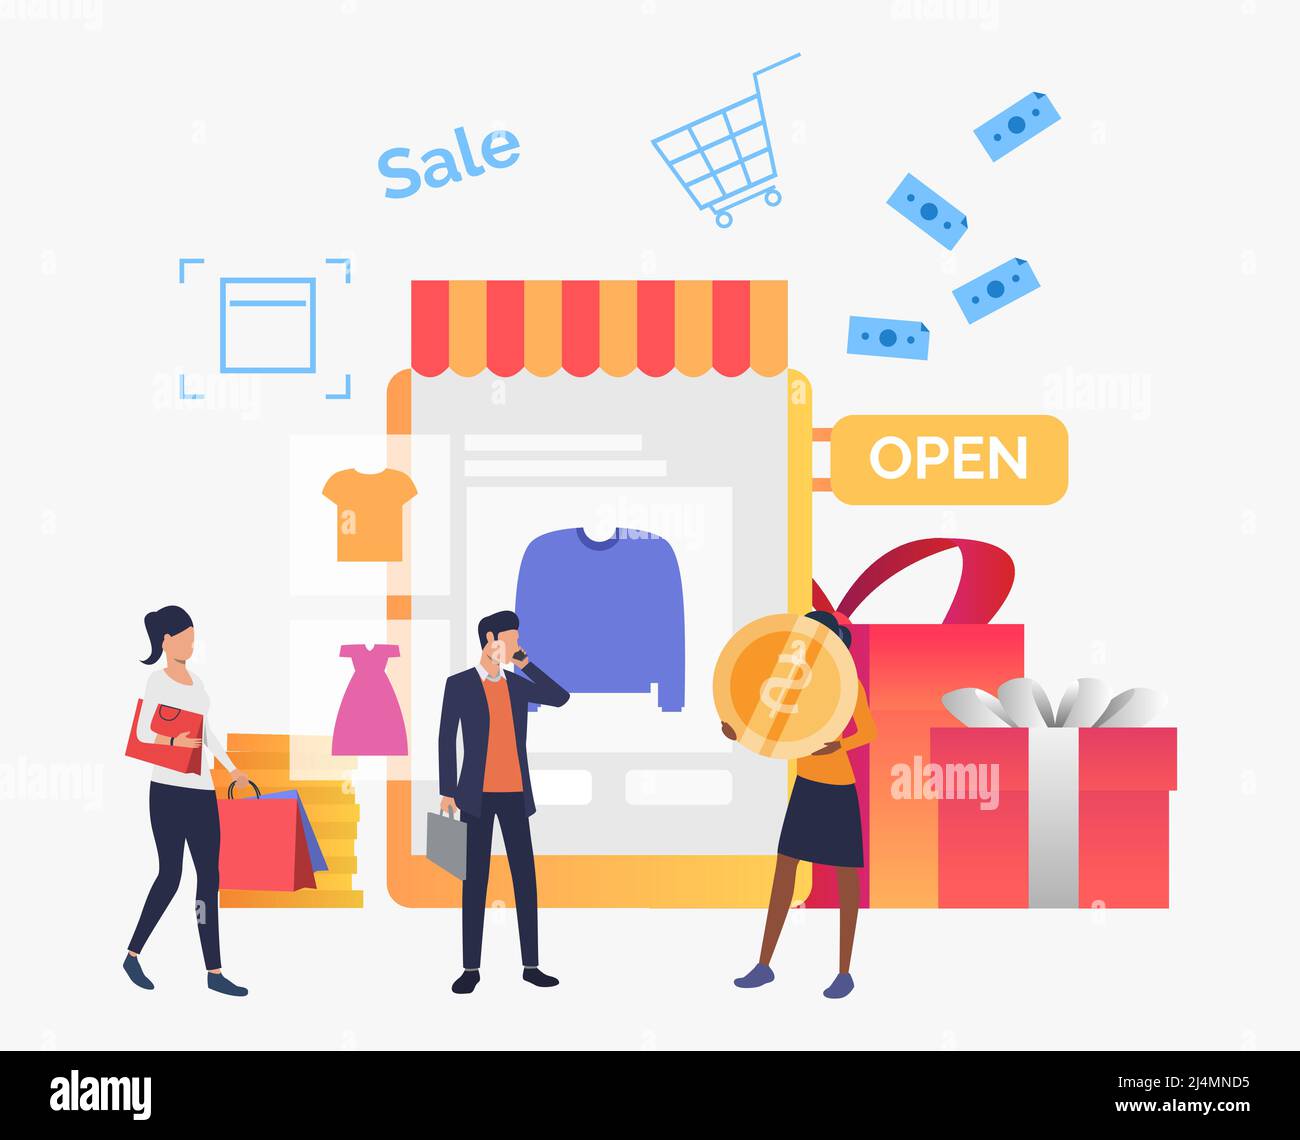 People buying clothes in online shop. Purchase, shop, retail, sale concept. Vector illustration can be used for topics like business, shopping, market Stock Vector